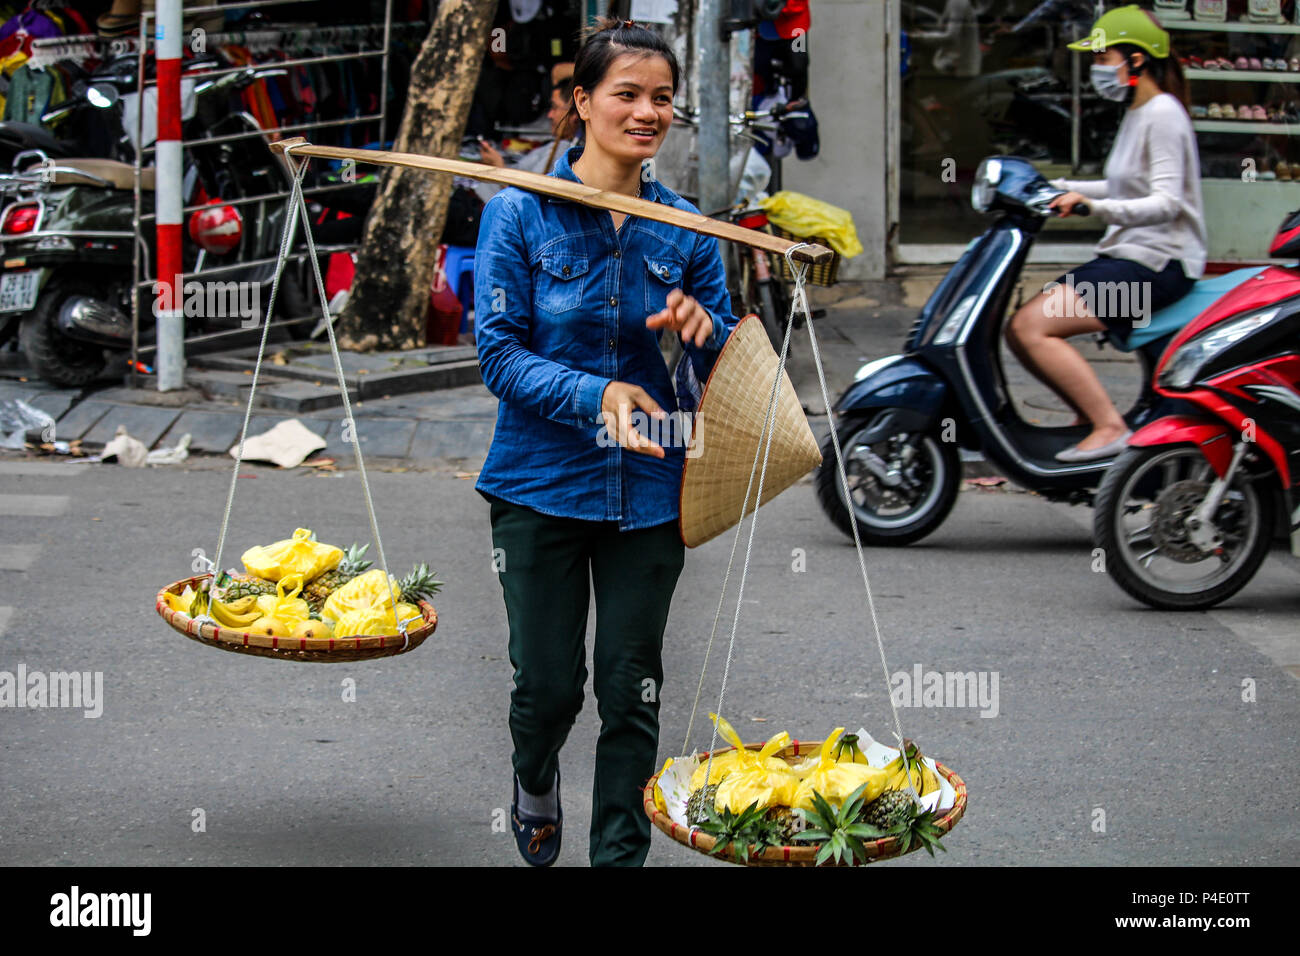 Hanoi, Vietnam - March 15, 2018: Girl selling fruits on the trafficked streets of Hanoi Stock Photo